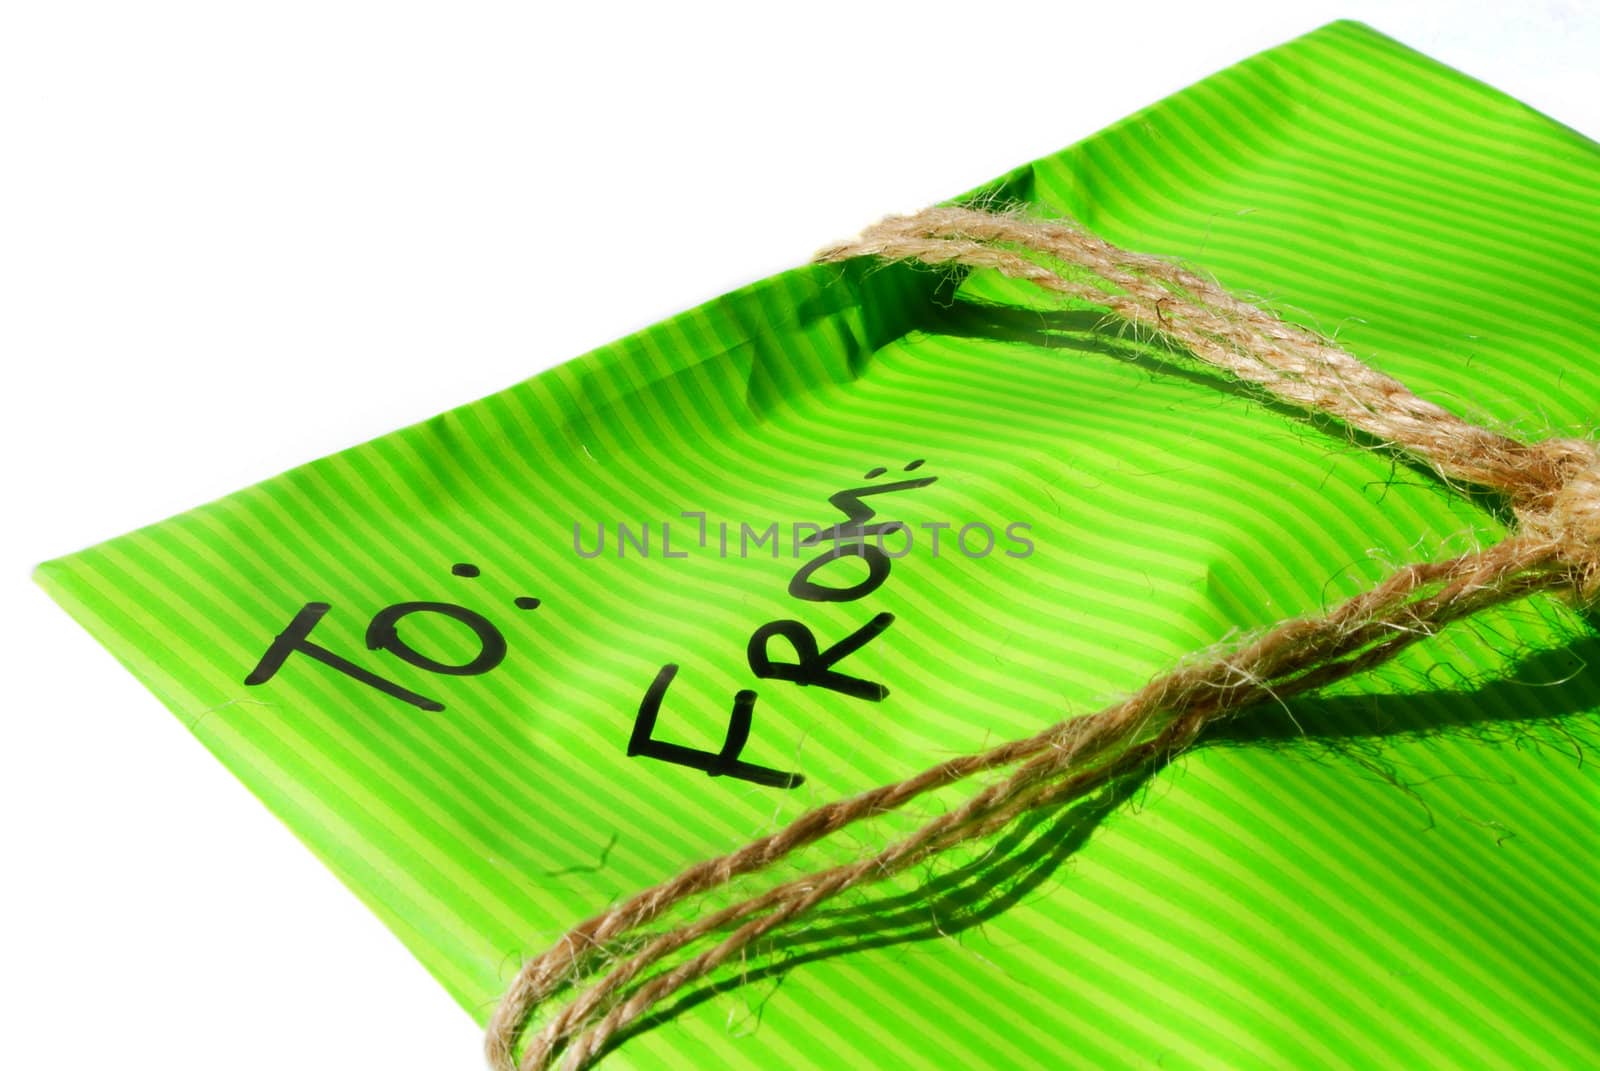 personal letter in a green tied envelop